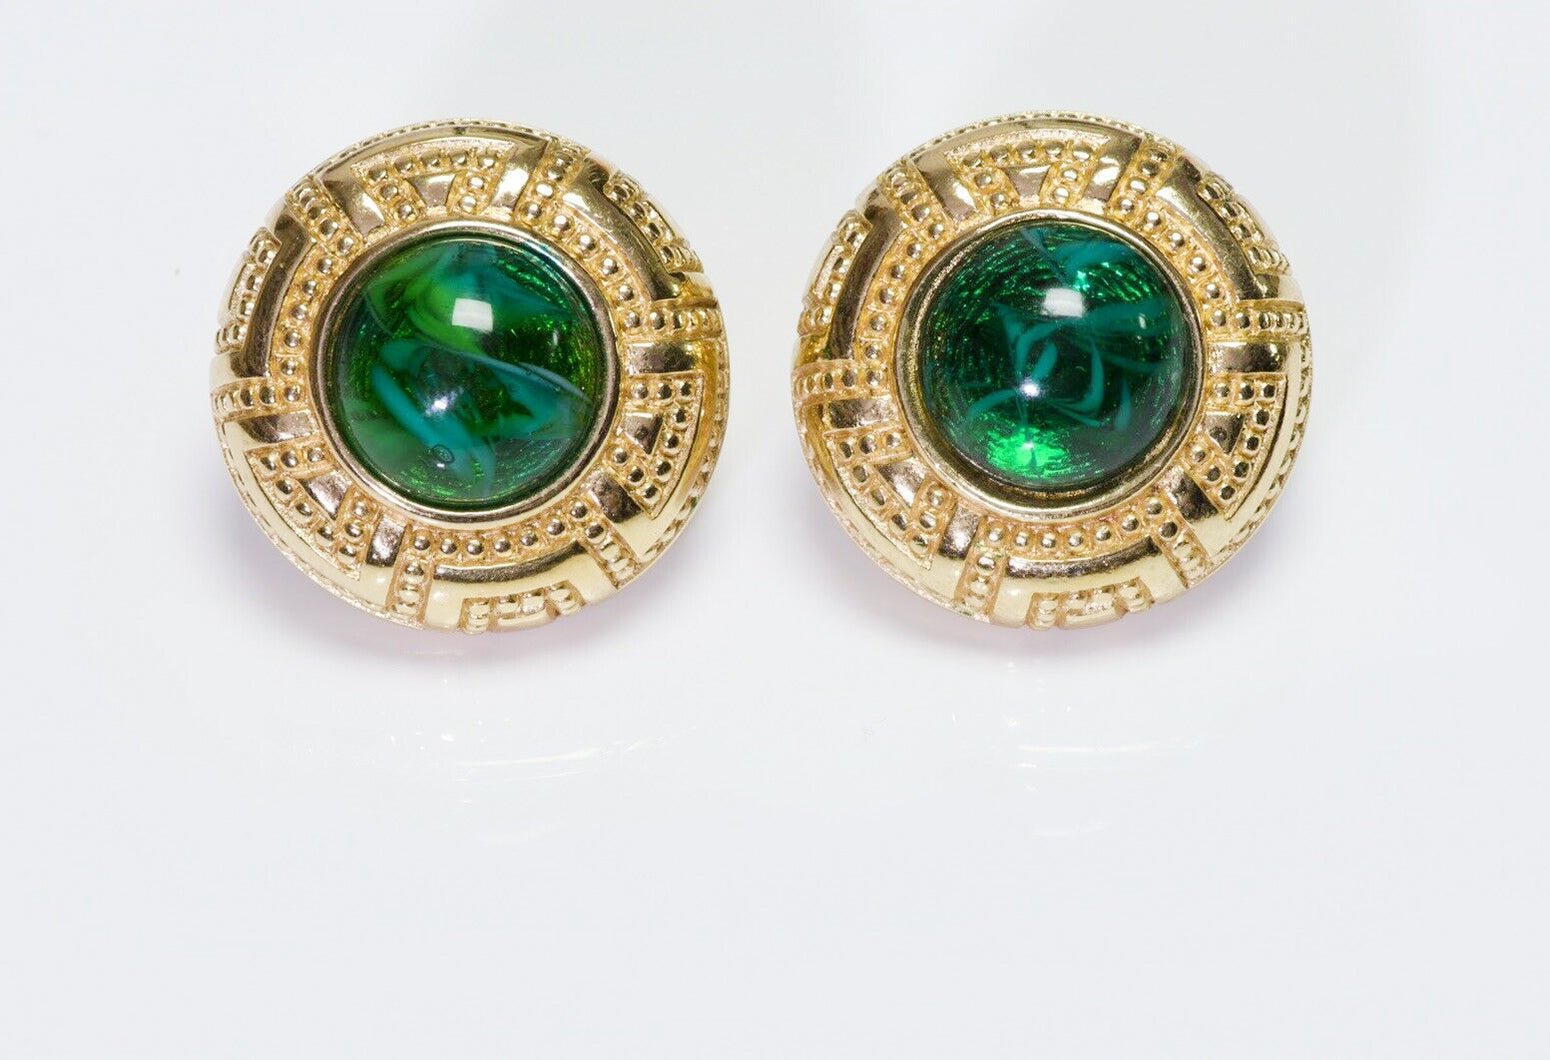 Vintage Christian DIOR Textured Green Cabochon Glass Earrings